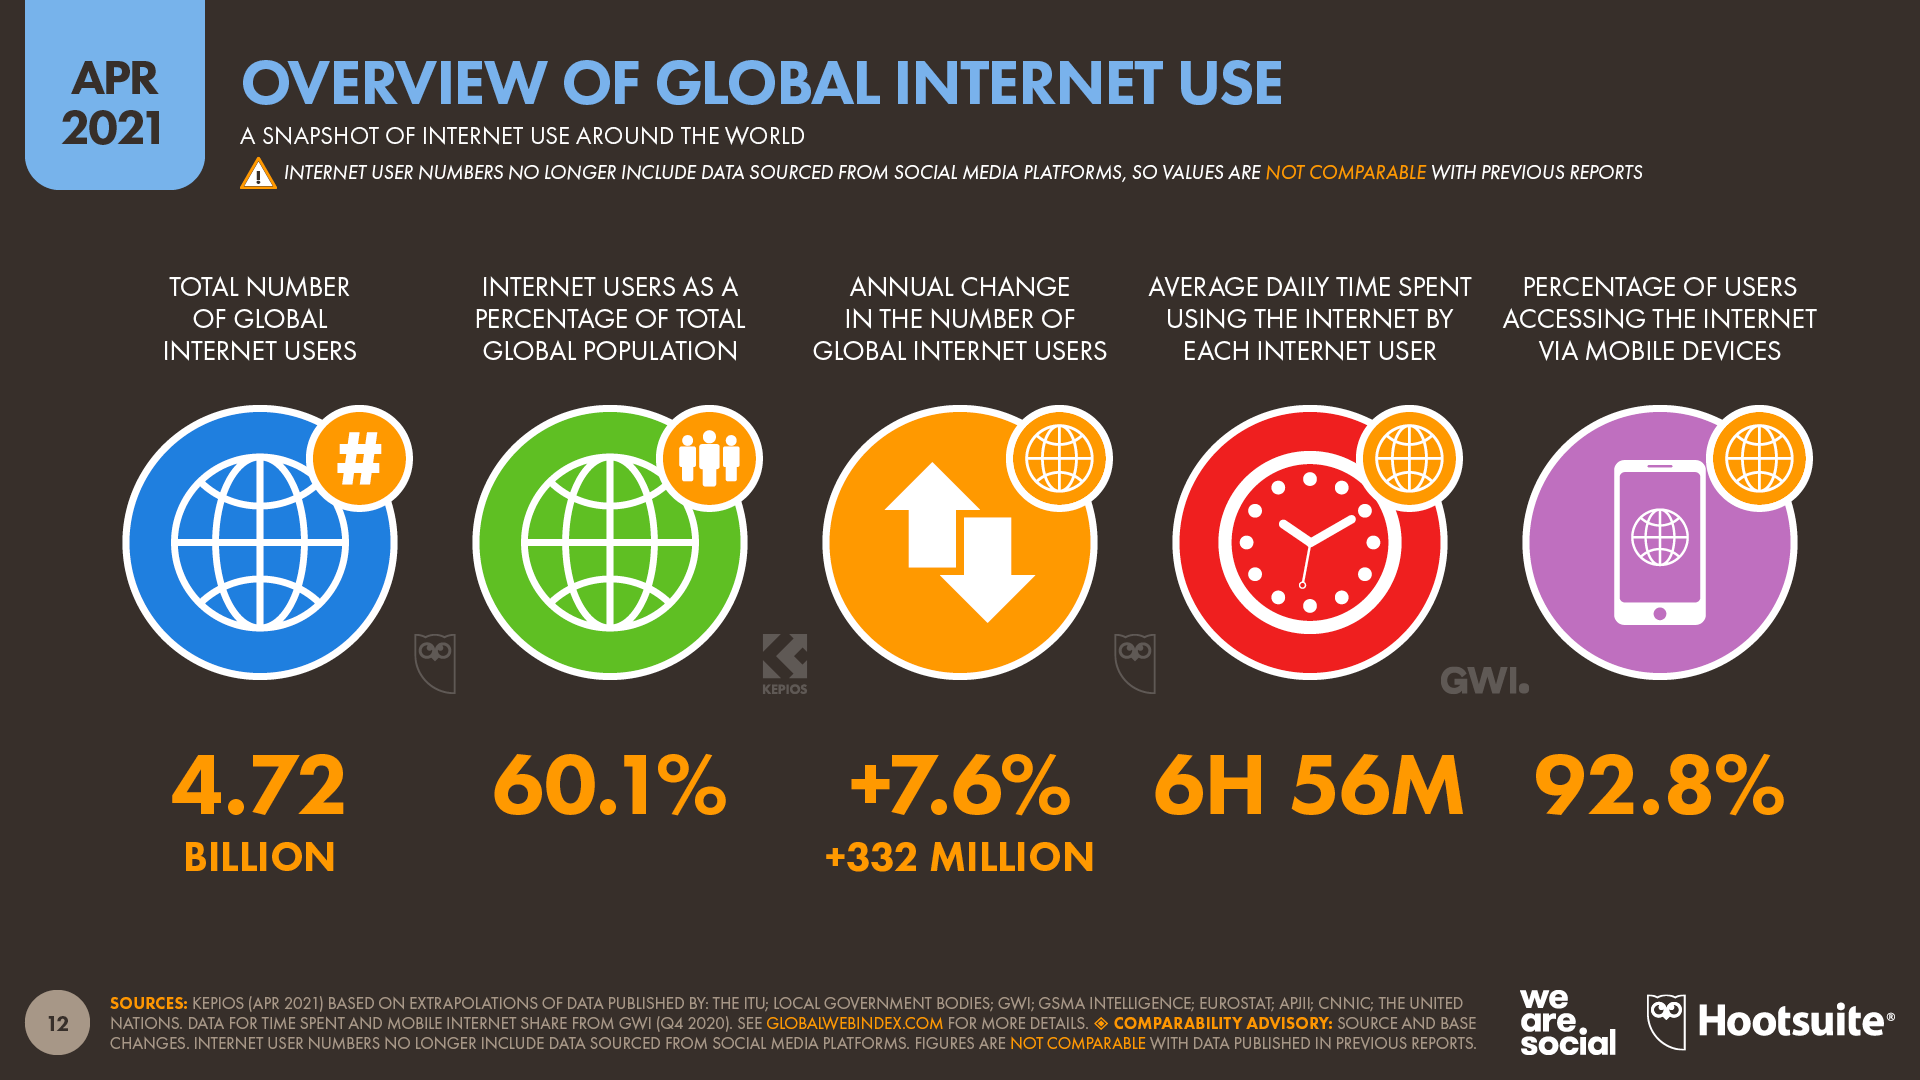 Overview of Global Internet Use April 2021 DataReportal